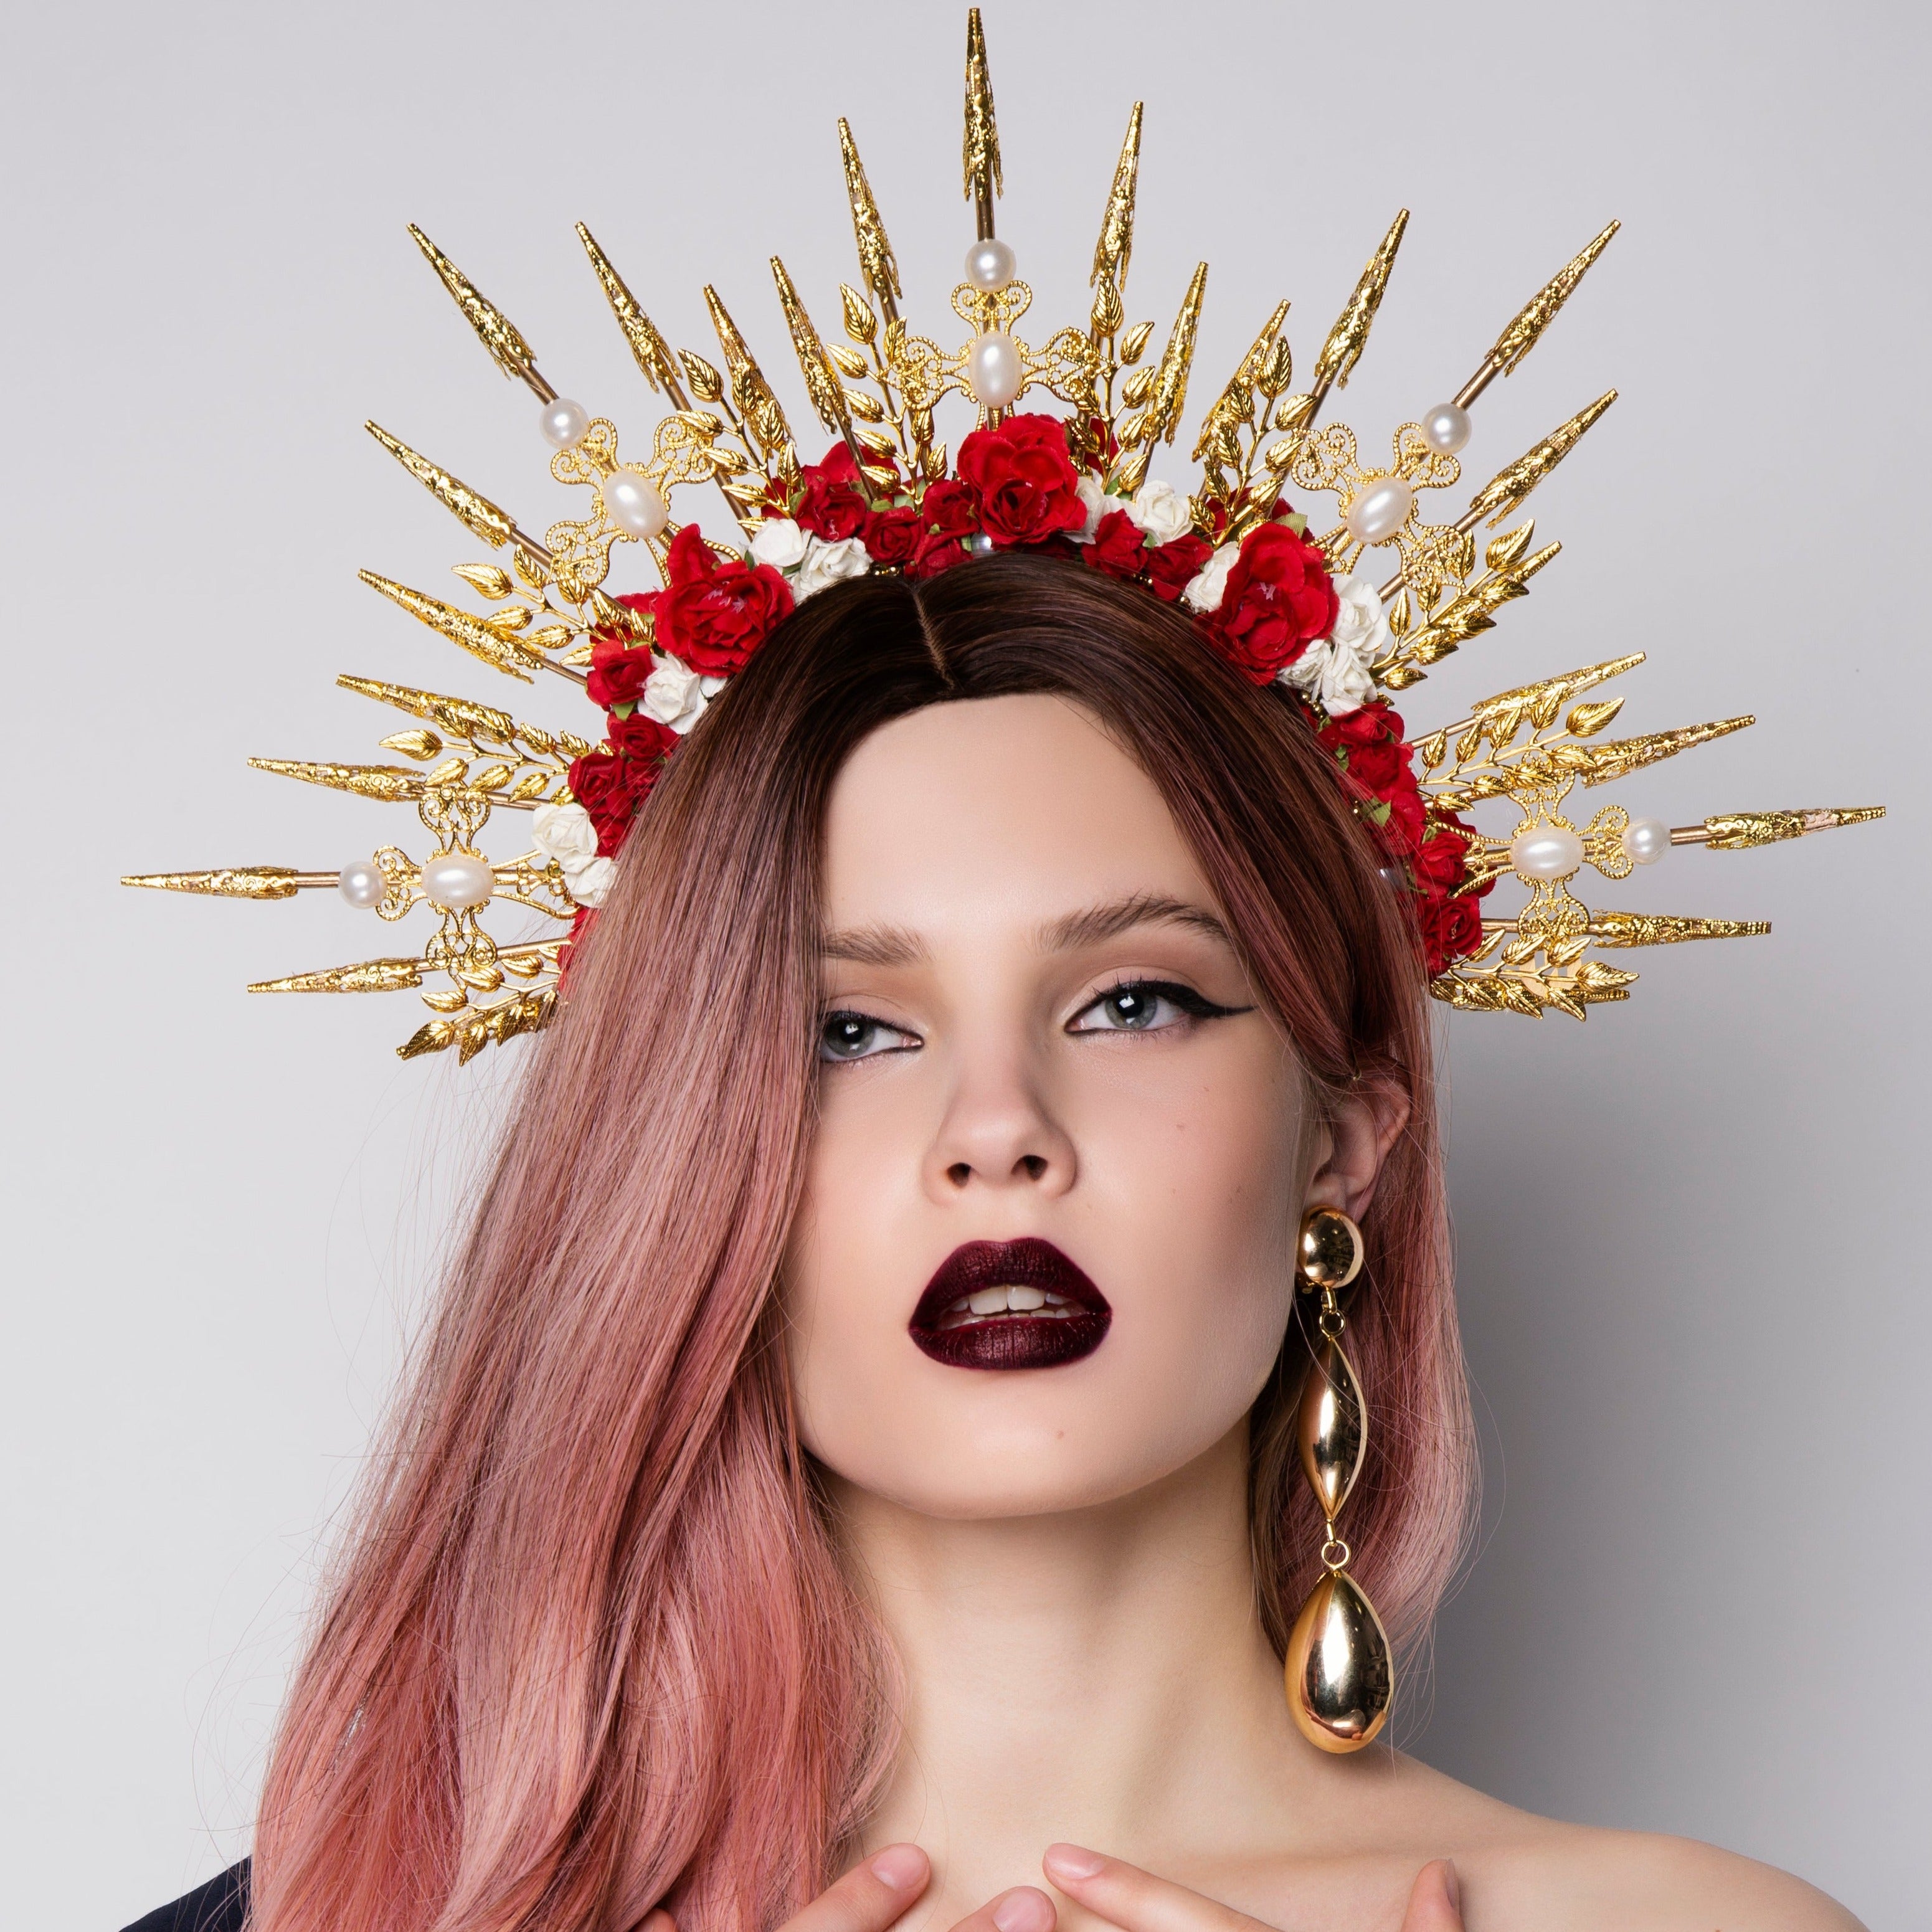 Golden Halo Crown With Flowers Rent